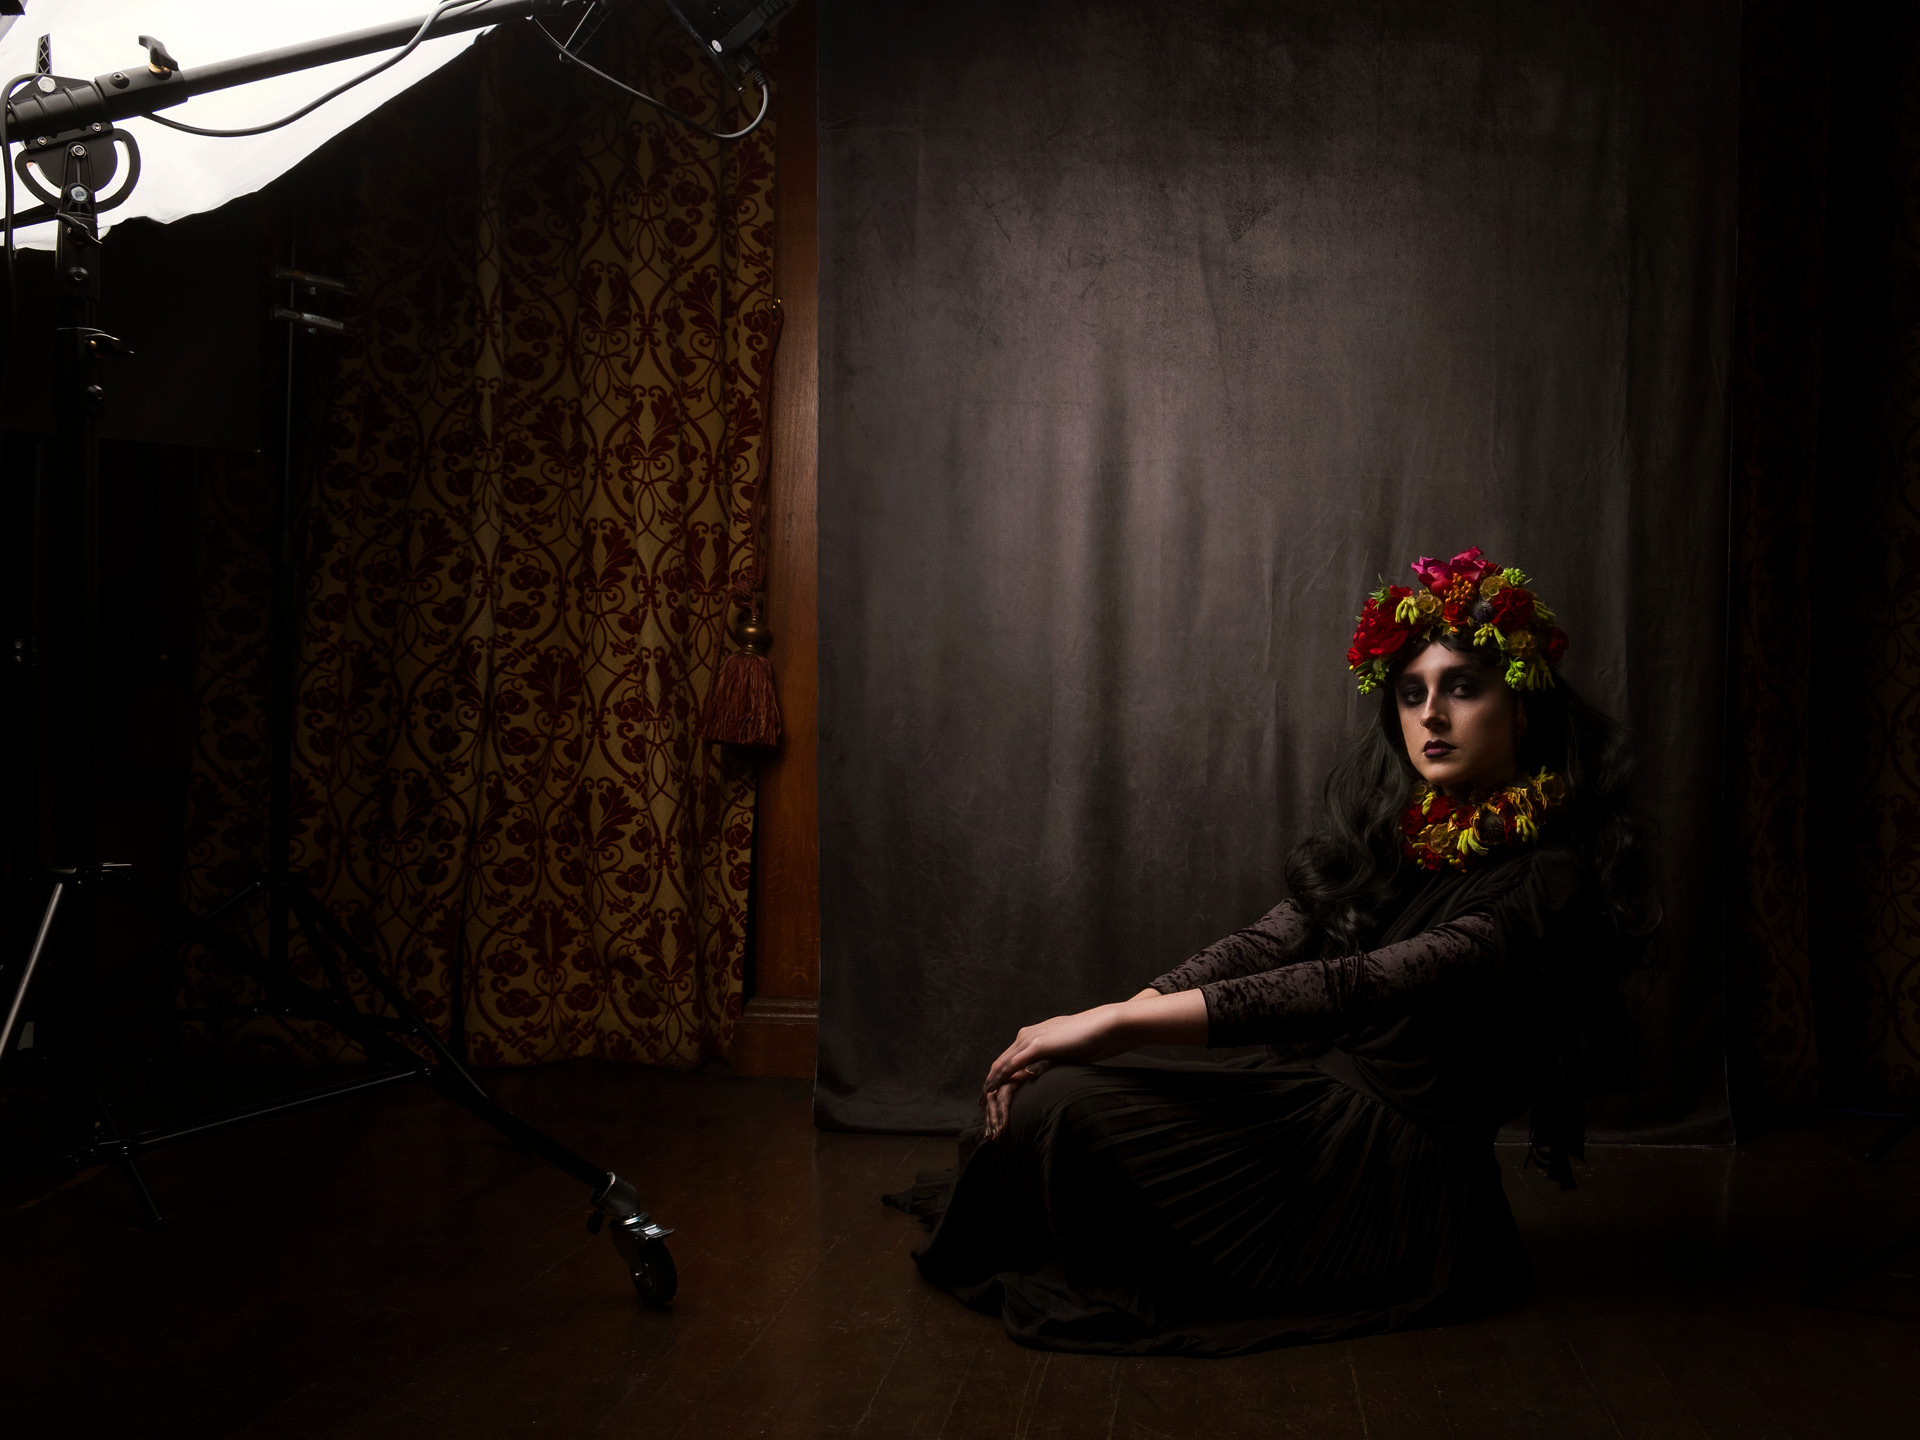 A dark photograph of a model with black hair and deep eyes sitting on the floor with notable background elements of the room still visible like the curtain and lighting gear 